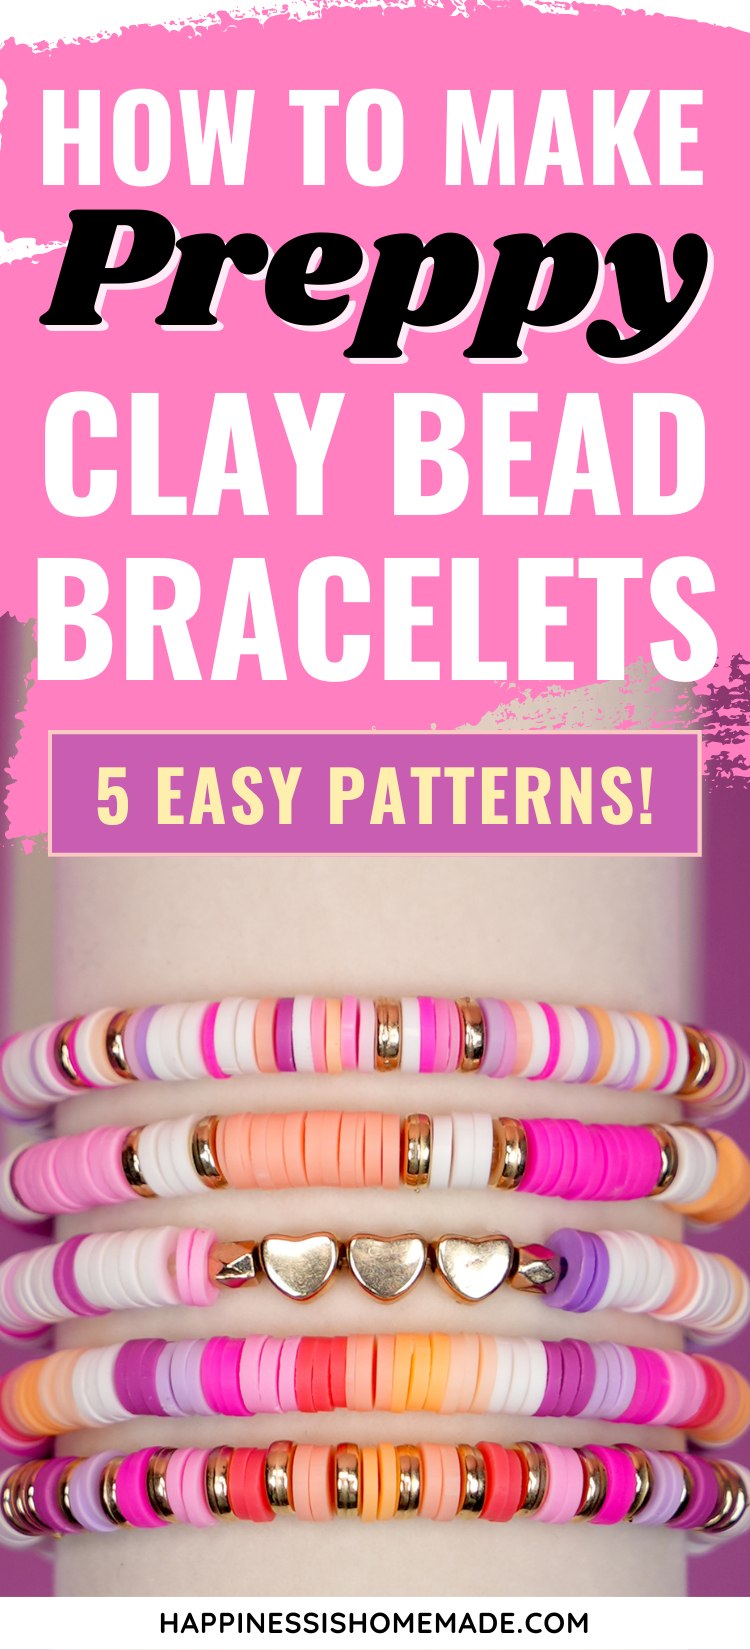 "How to Make Preppy Clay Bead Bracelets" graphic with text and photo of colorful clay bead bracelets